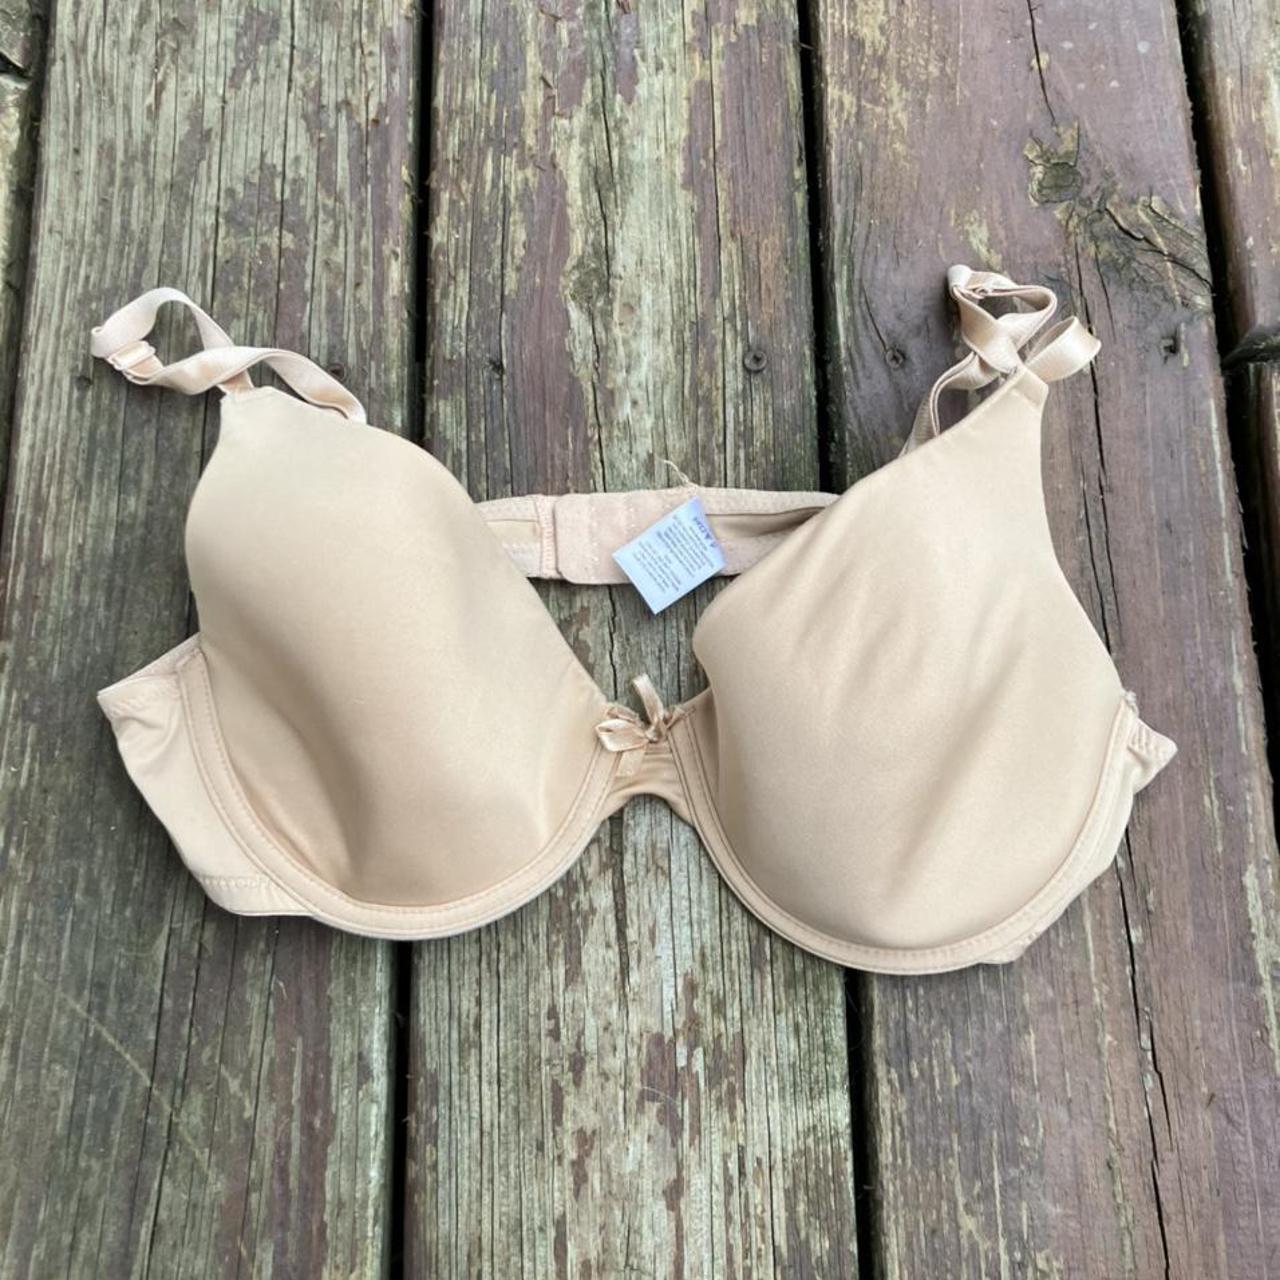 tan bra size 36C unsure of brand good condition with - Depop